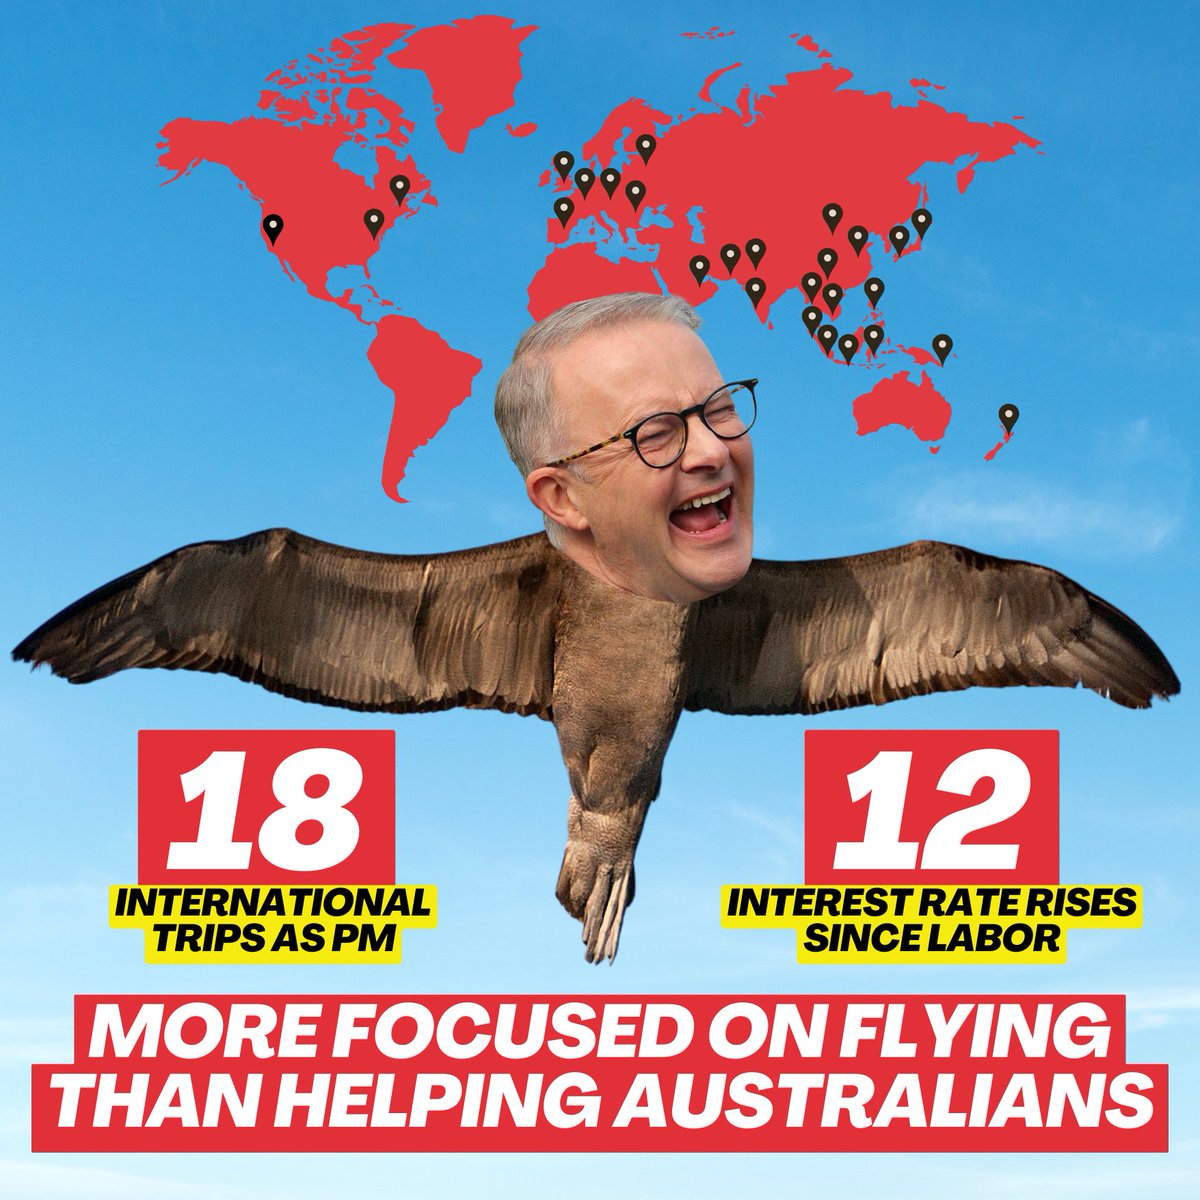 Albotross is flying far and wide in VIP style, while Australians struggle with the cost of living. Australians deserve better than this Prime Minister.